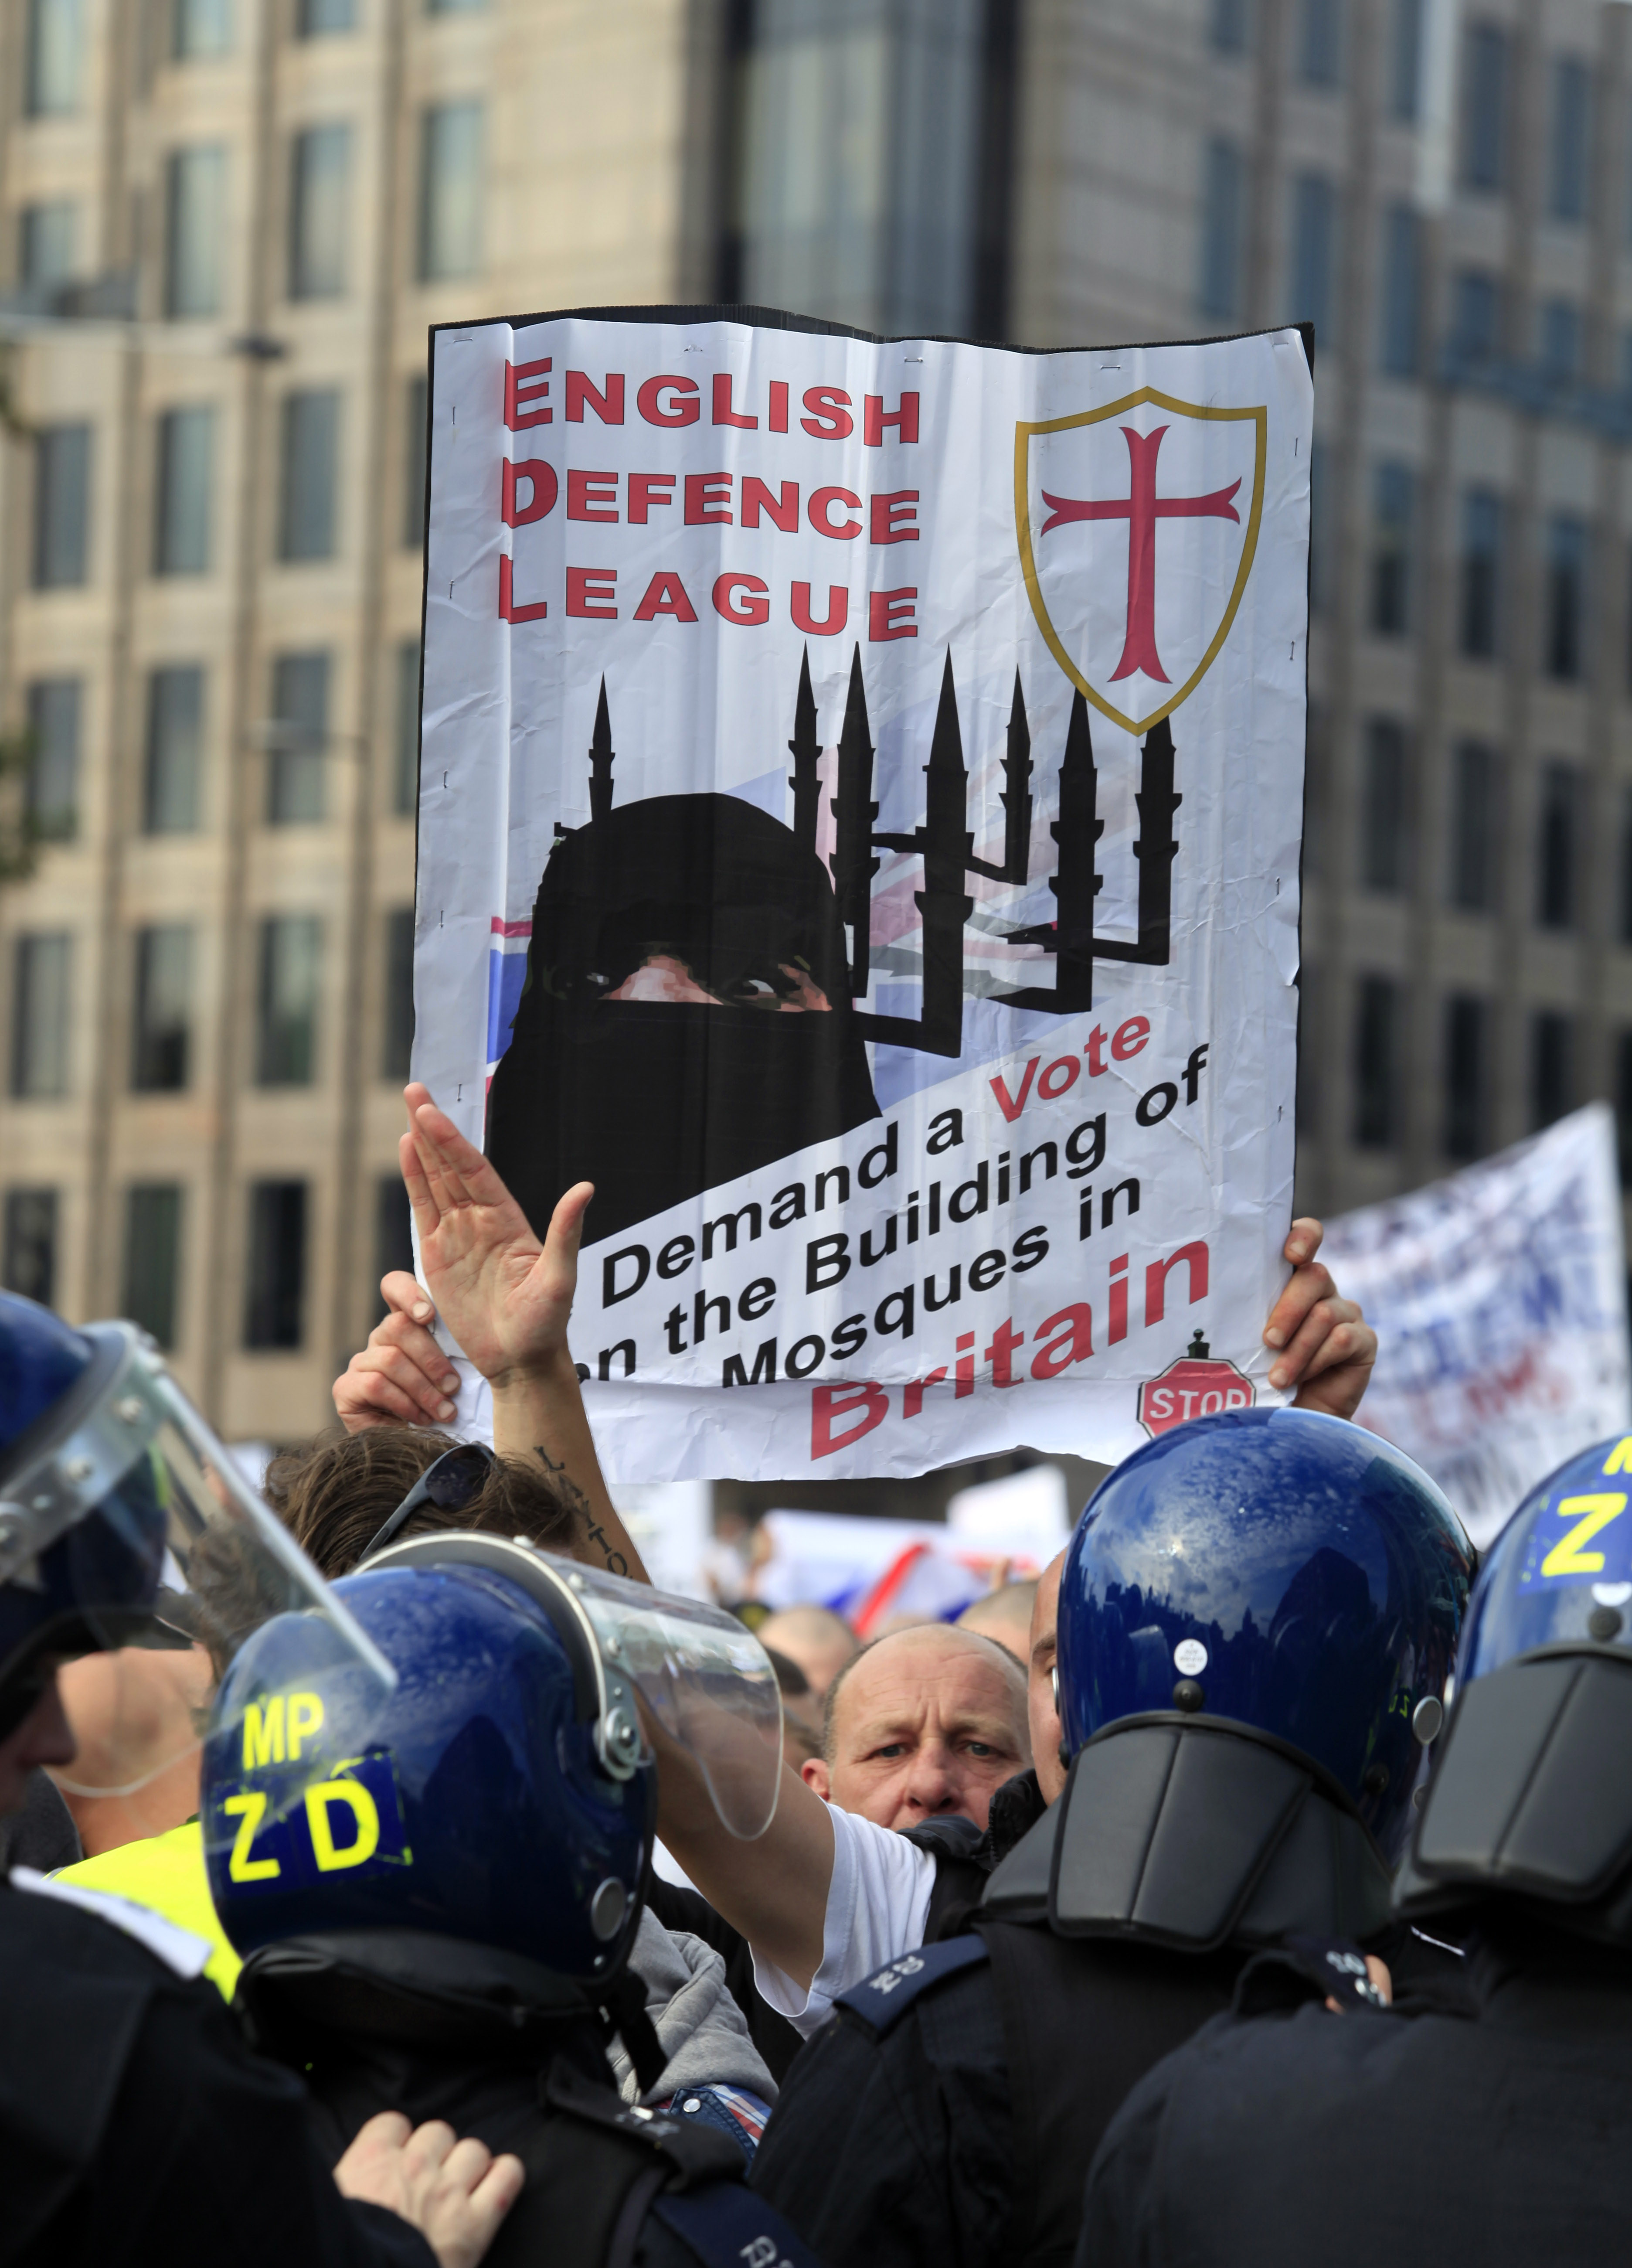 Swedish Defence League, Protester, Demonstration, English Defence League, Högerextrema, Muslimer